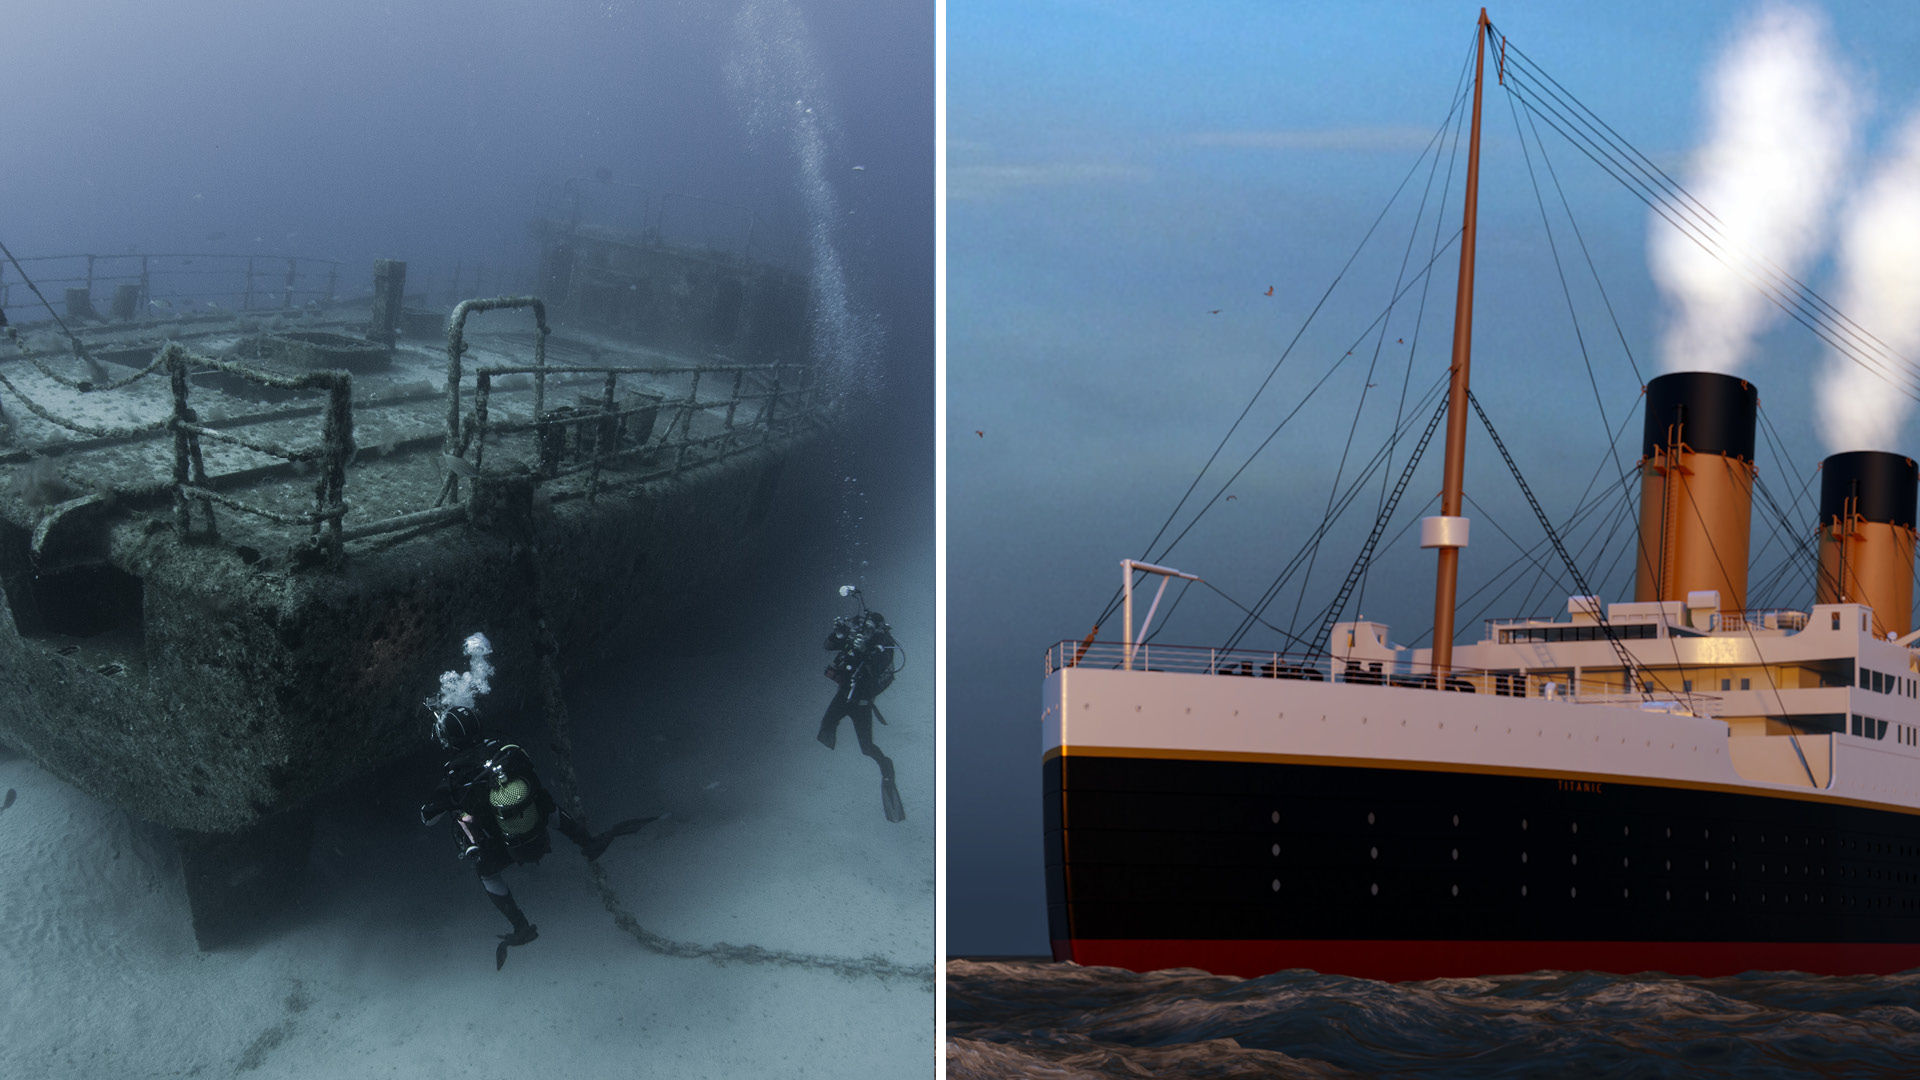 Now You Can Be A Mission Specialist At The Titanic Wreckage Site, Than